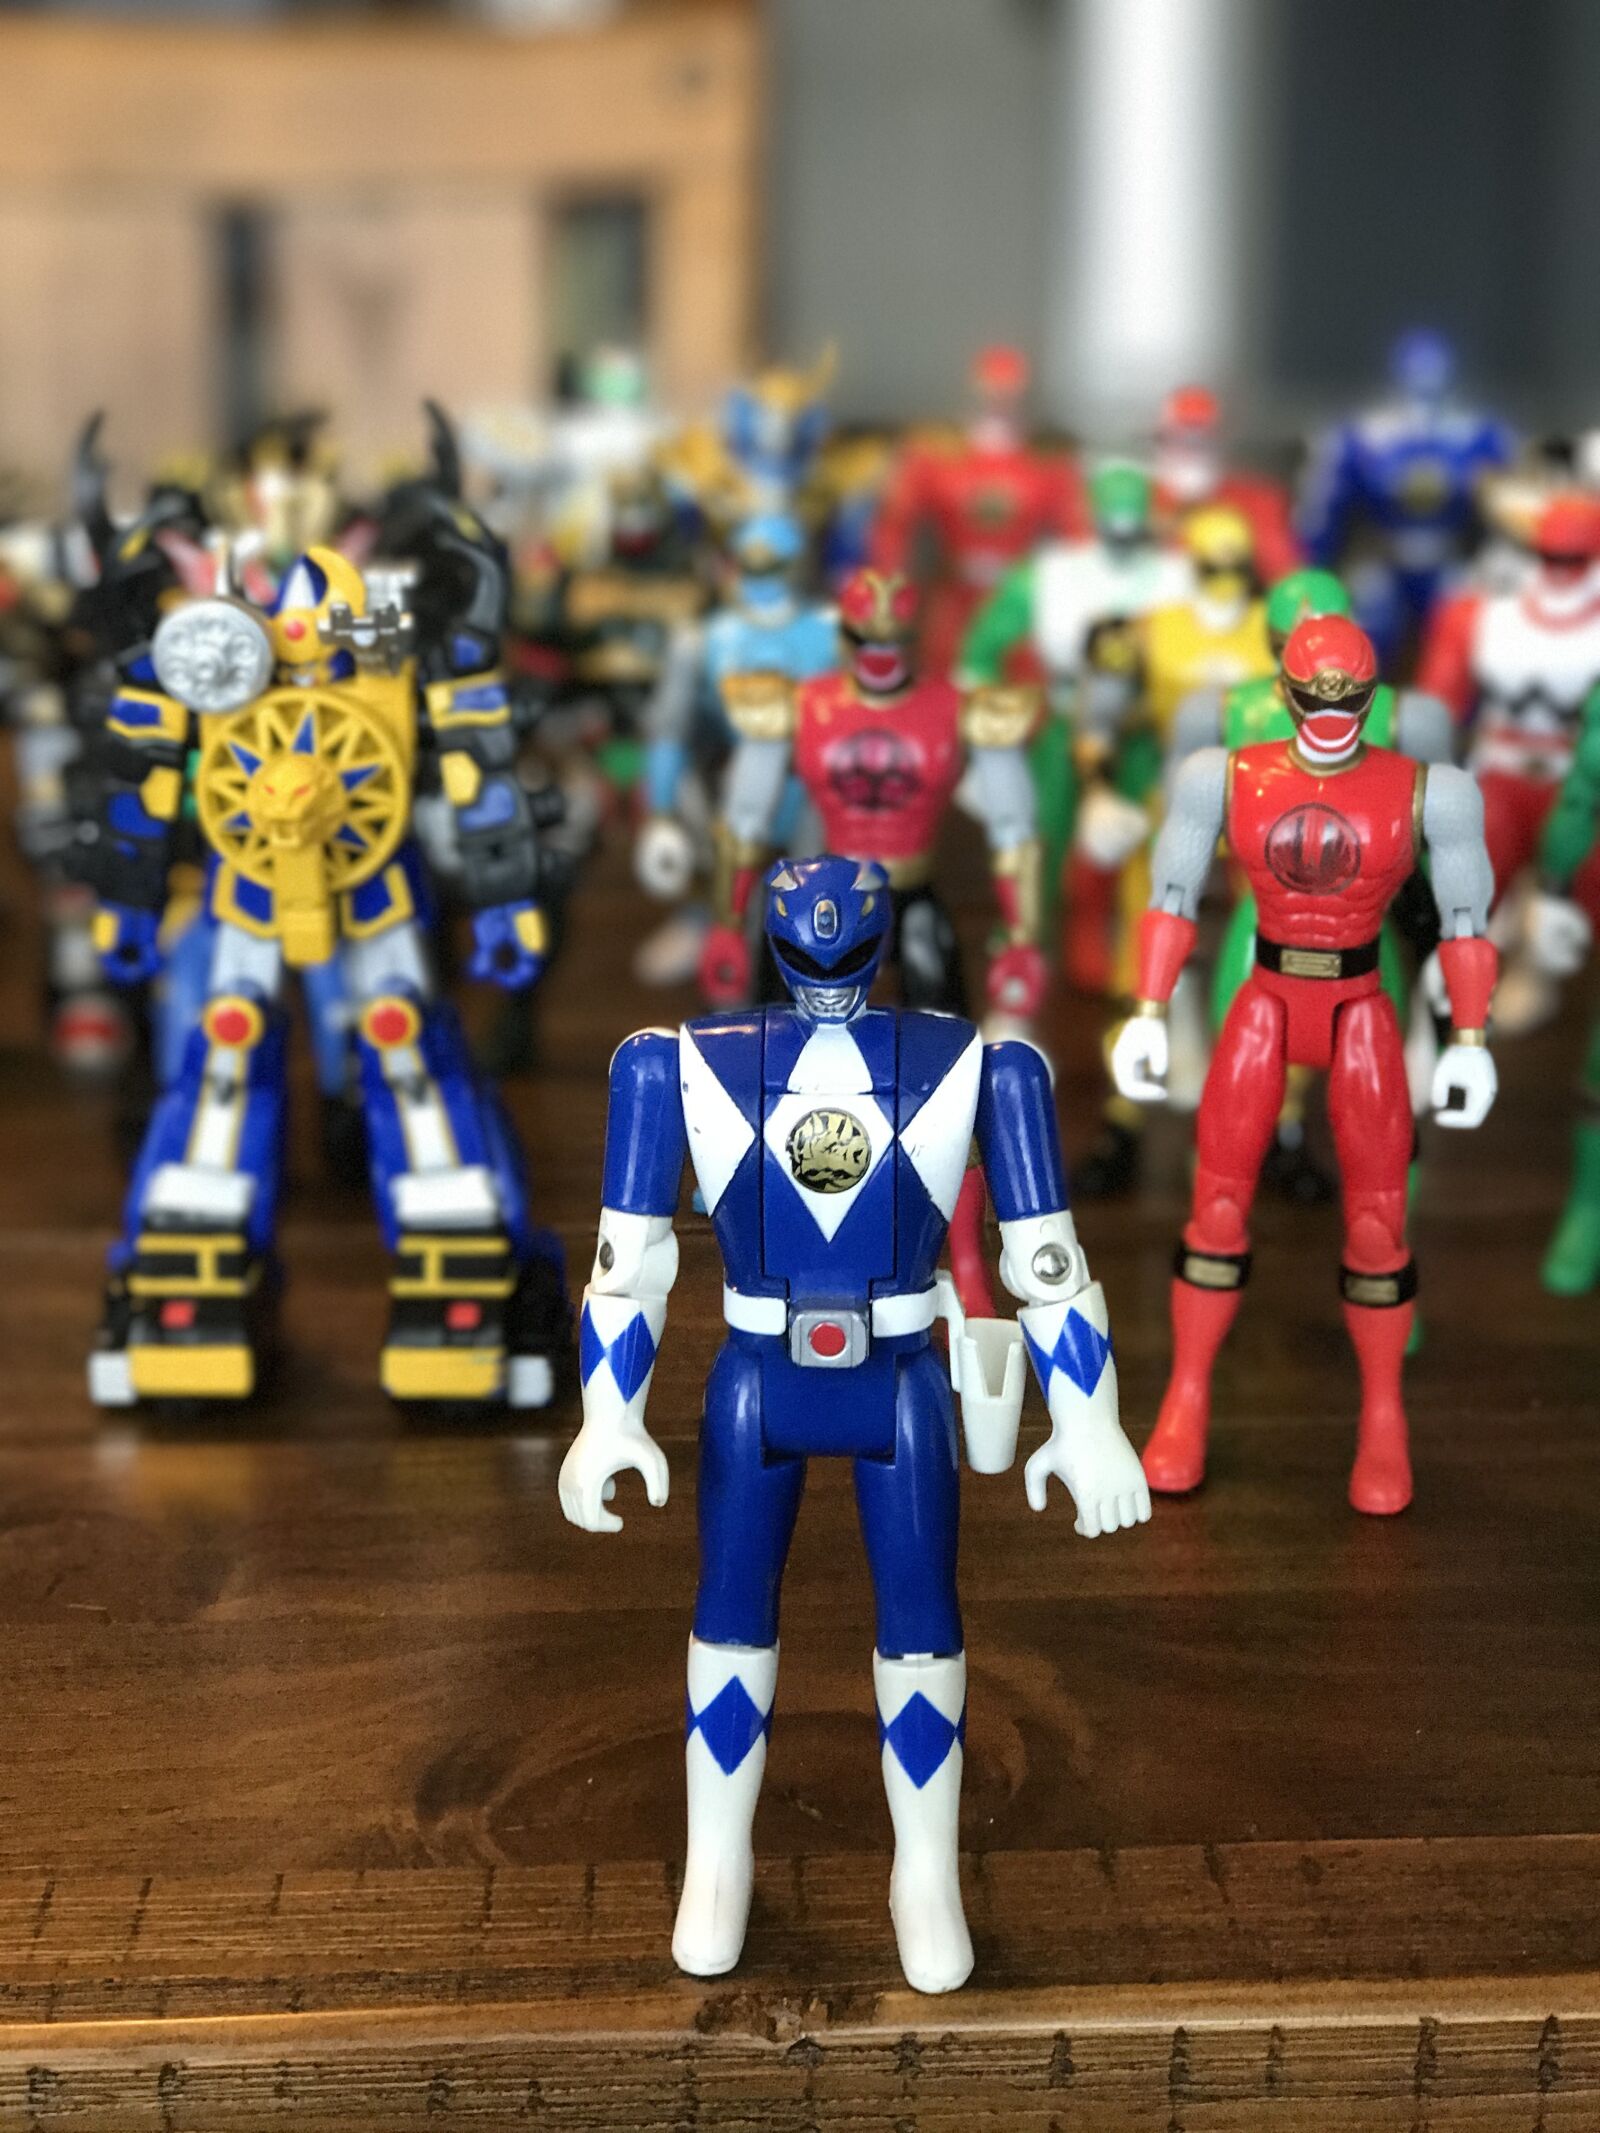 iPhone 7 Plus back iSight Duo camera 6.6mm f/2.8 sample photo. Power, rangers, toys photography